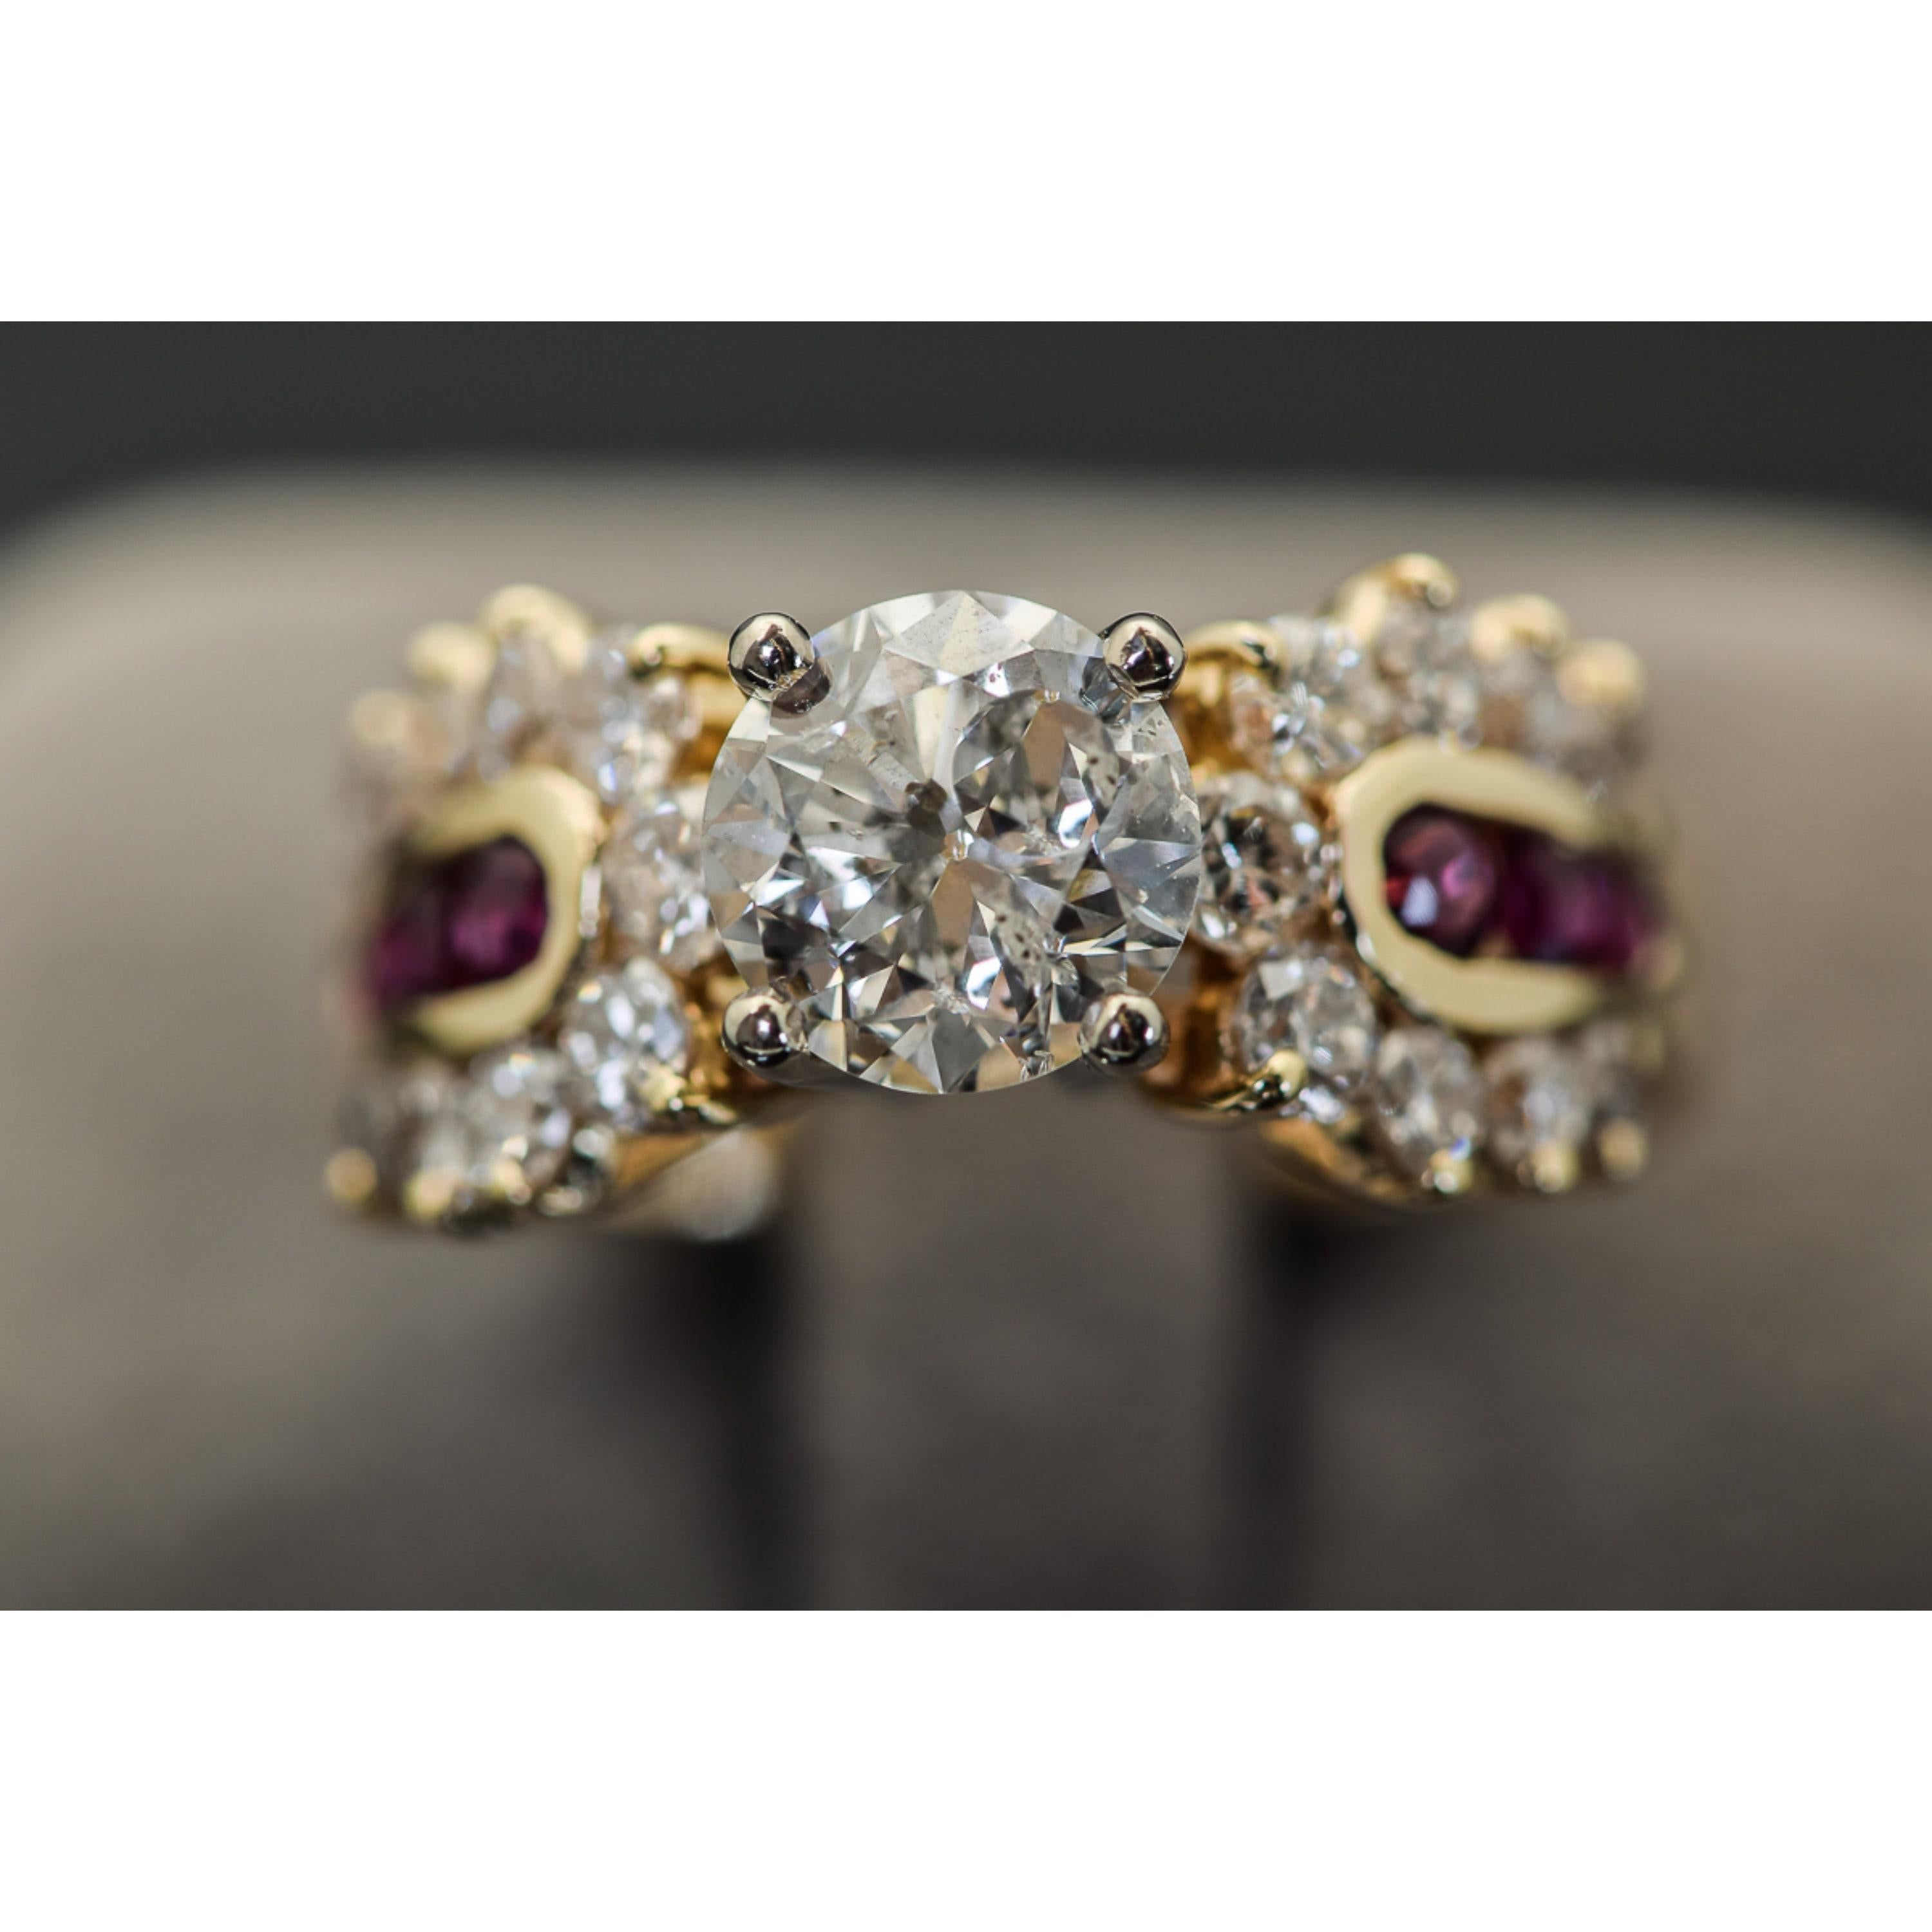 For Sale:  Certified 2.43 Carat Diamond Ruby Art Deco Style Engagement Ring in 18K Gold 5